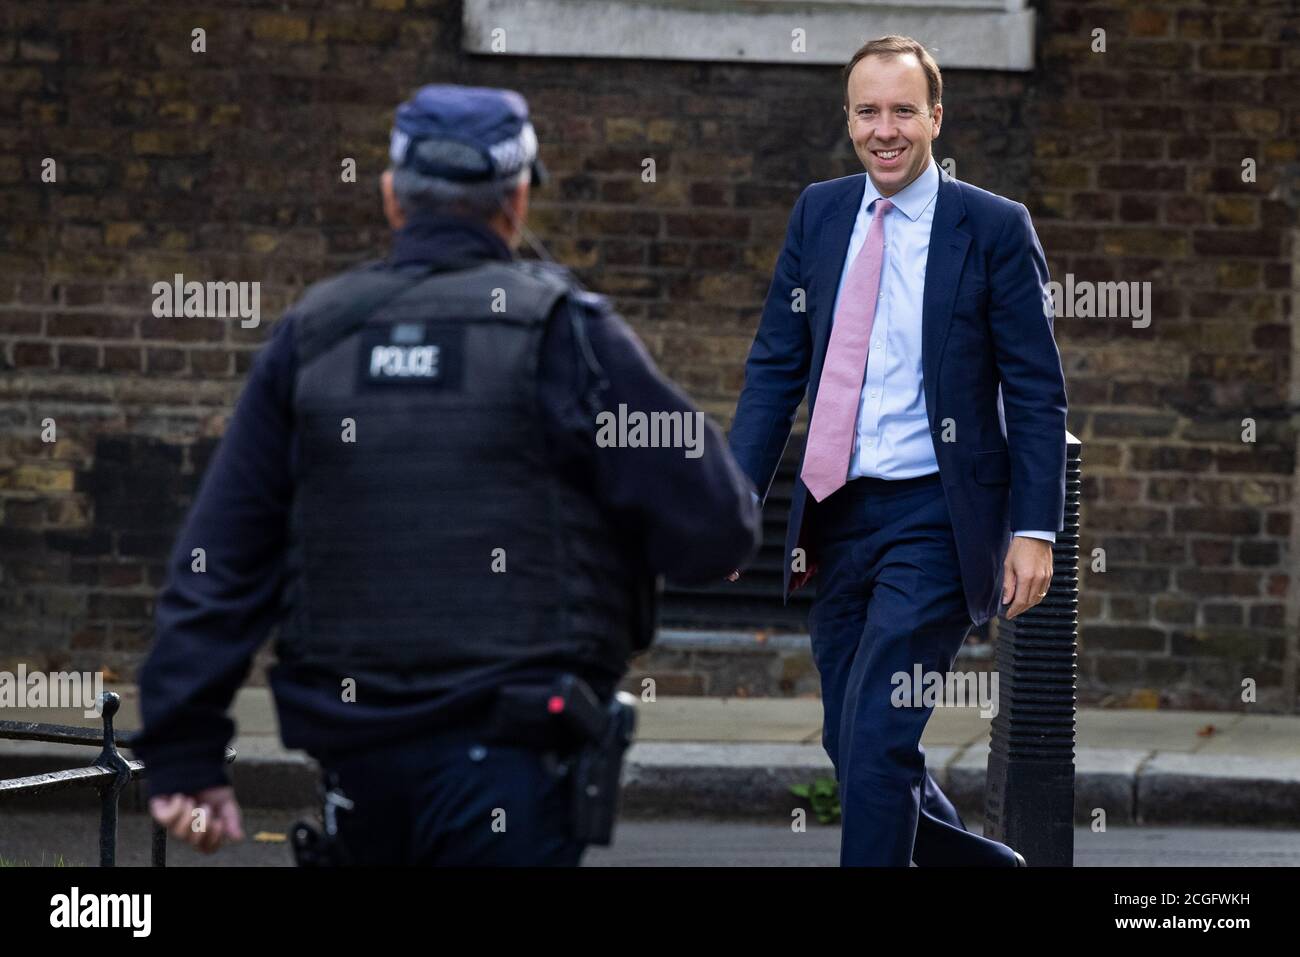 Health Secretary Matt Hancock, arrives in Downing Street, London. Boris Johnson is facing open revolt from some Tory backbenchers over new lockdown restrictions. It comes after reports that ministers are divided over new social distancing rules in England which will limit social gatherings to groups of six people both indoors and outside from Monday. Stock Photo